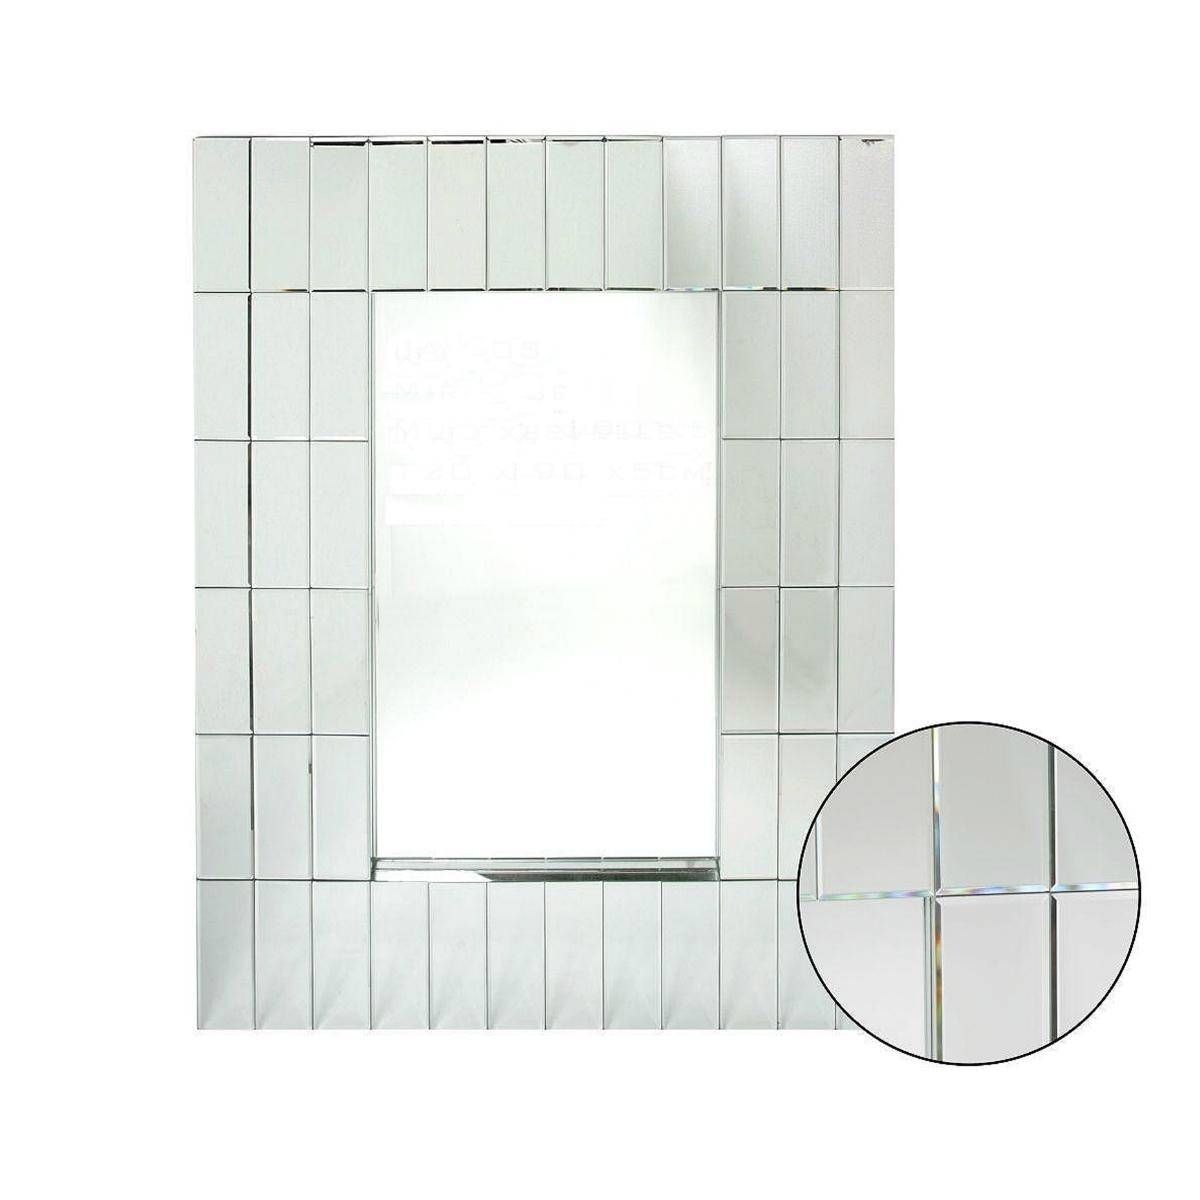 Mirror : Glamorous Small Bevelled Wall Mirrors Lovely Small Round For Small Bevelled Mirrors (View 15 of 15)